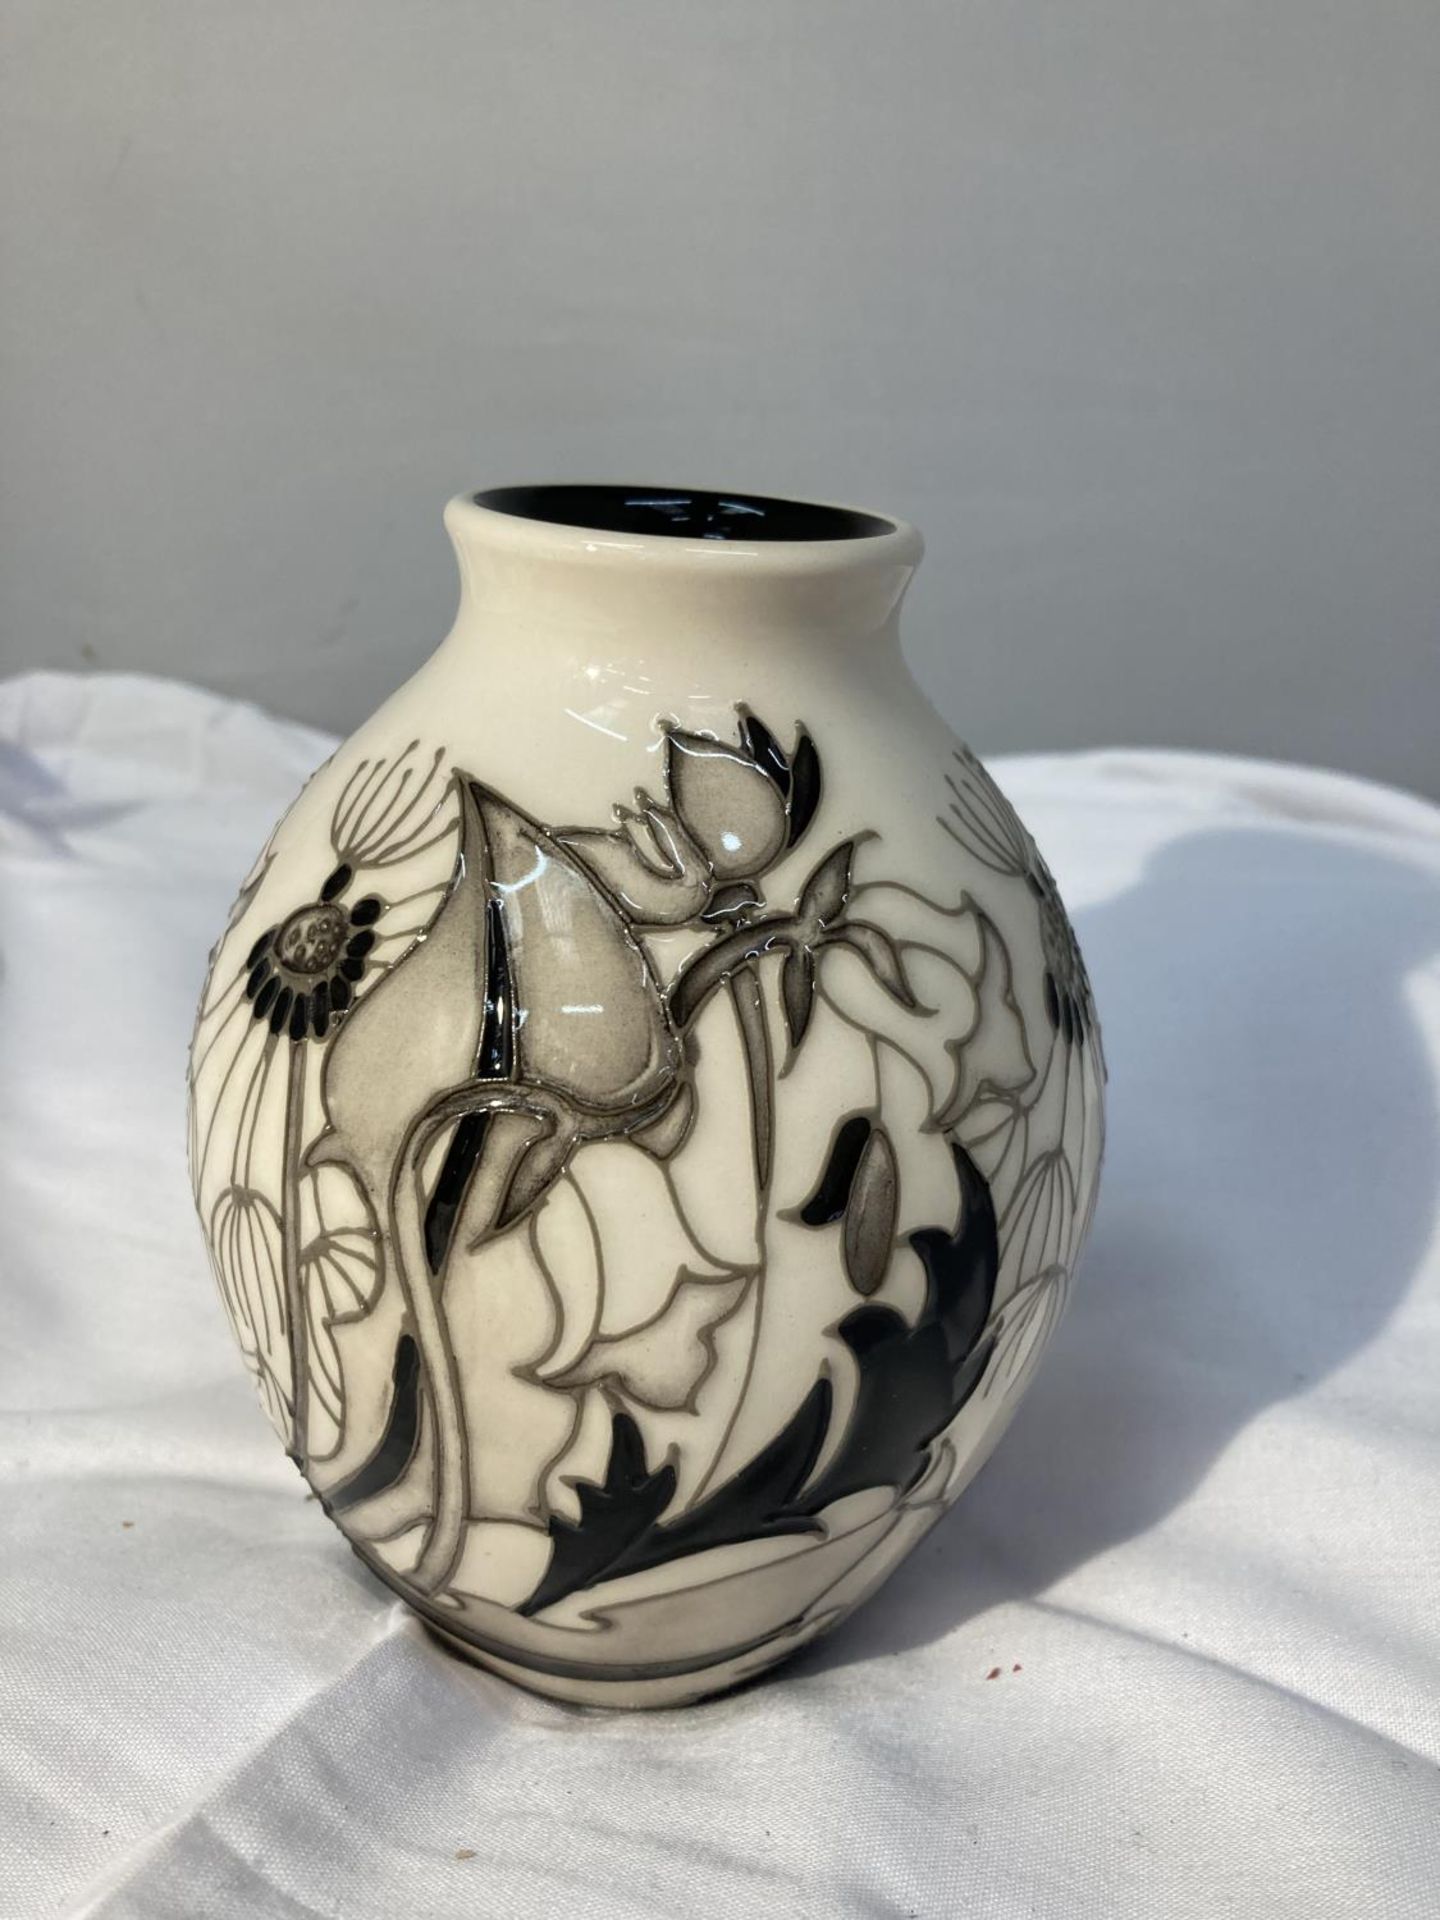 A MOORCROFT TRIAL VASE 6/11/18 BLACKTHORN 5 INCHES TALL - Image 2 of 5